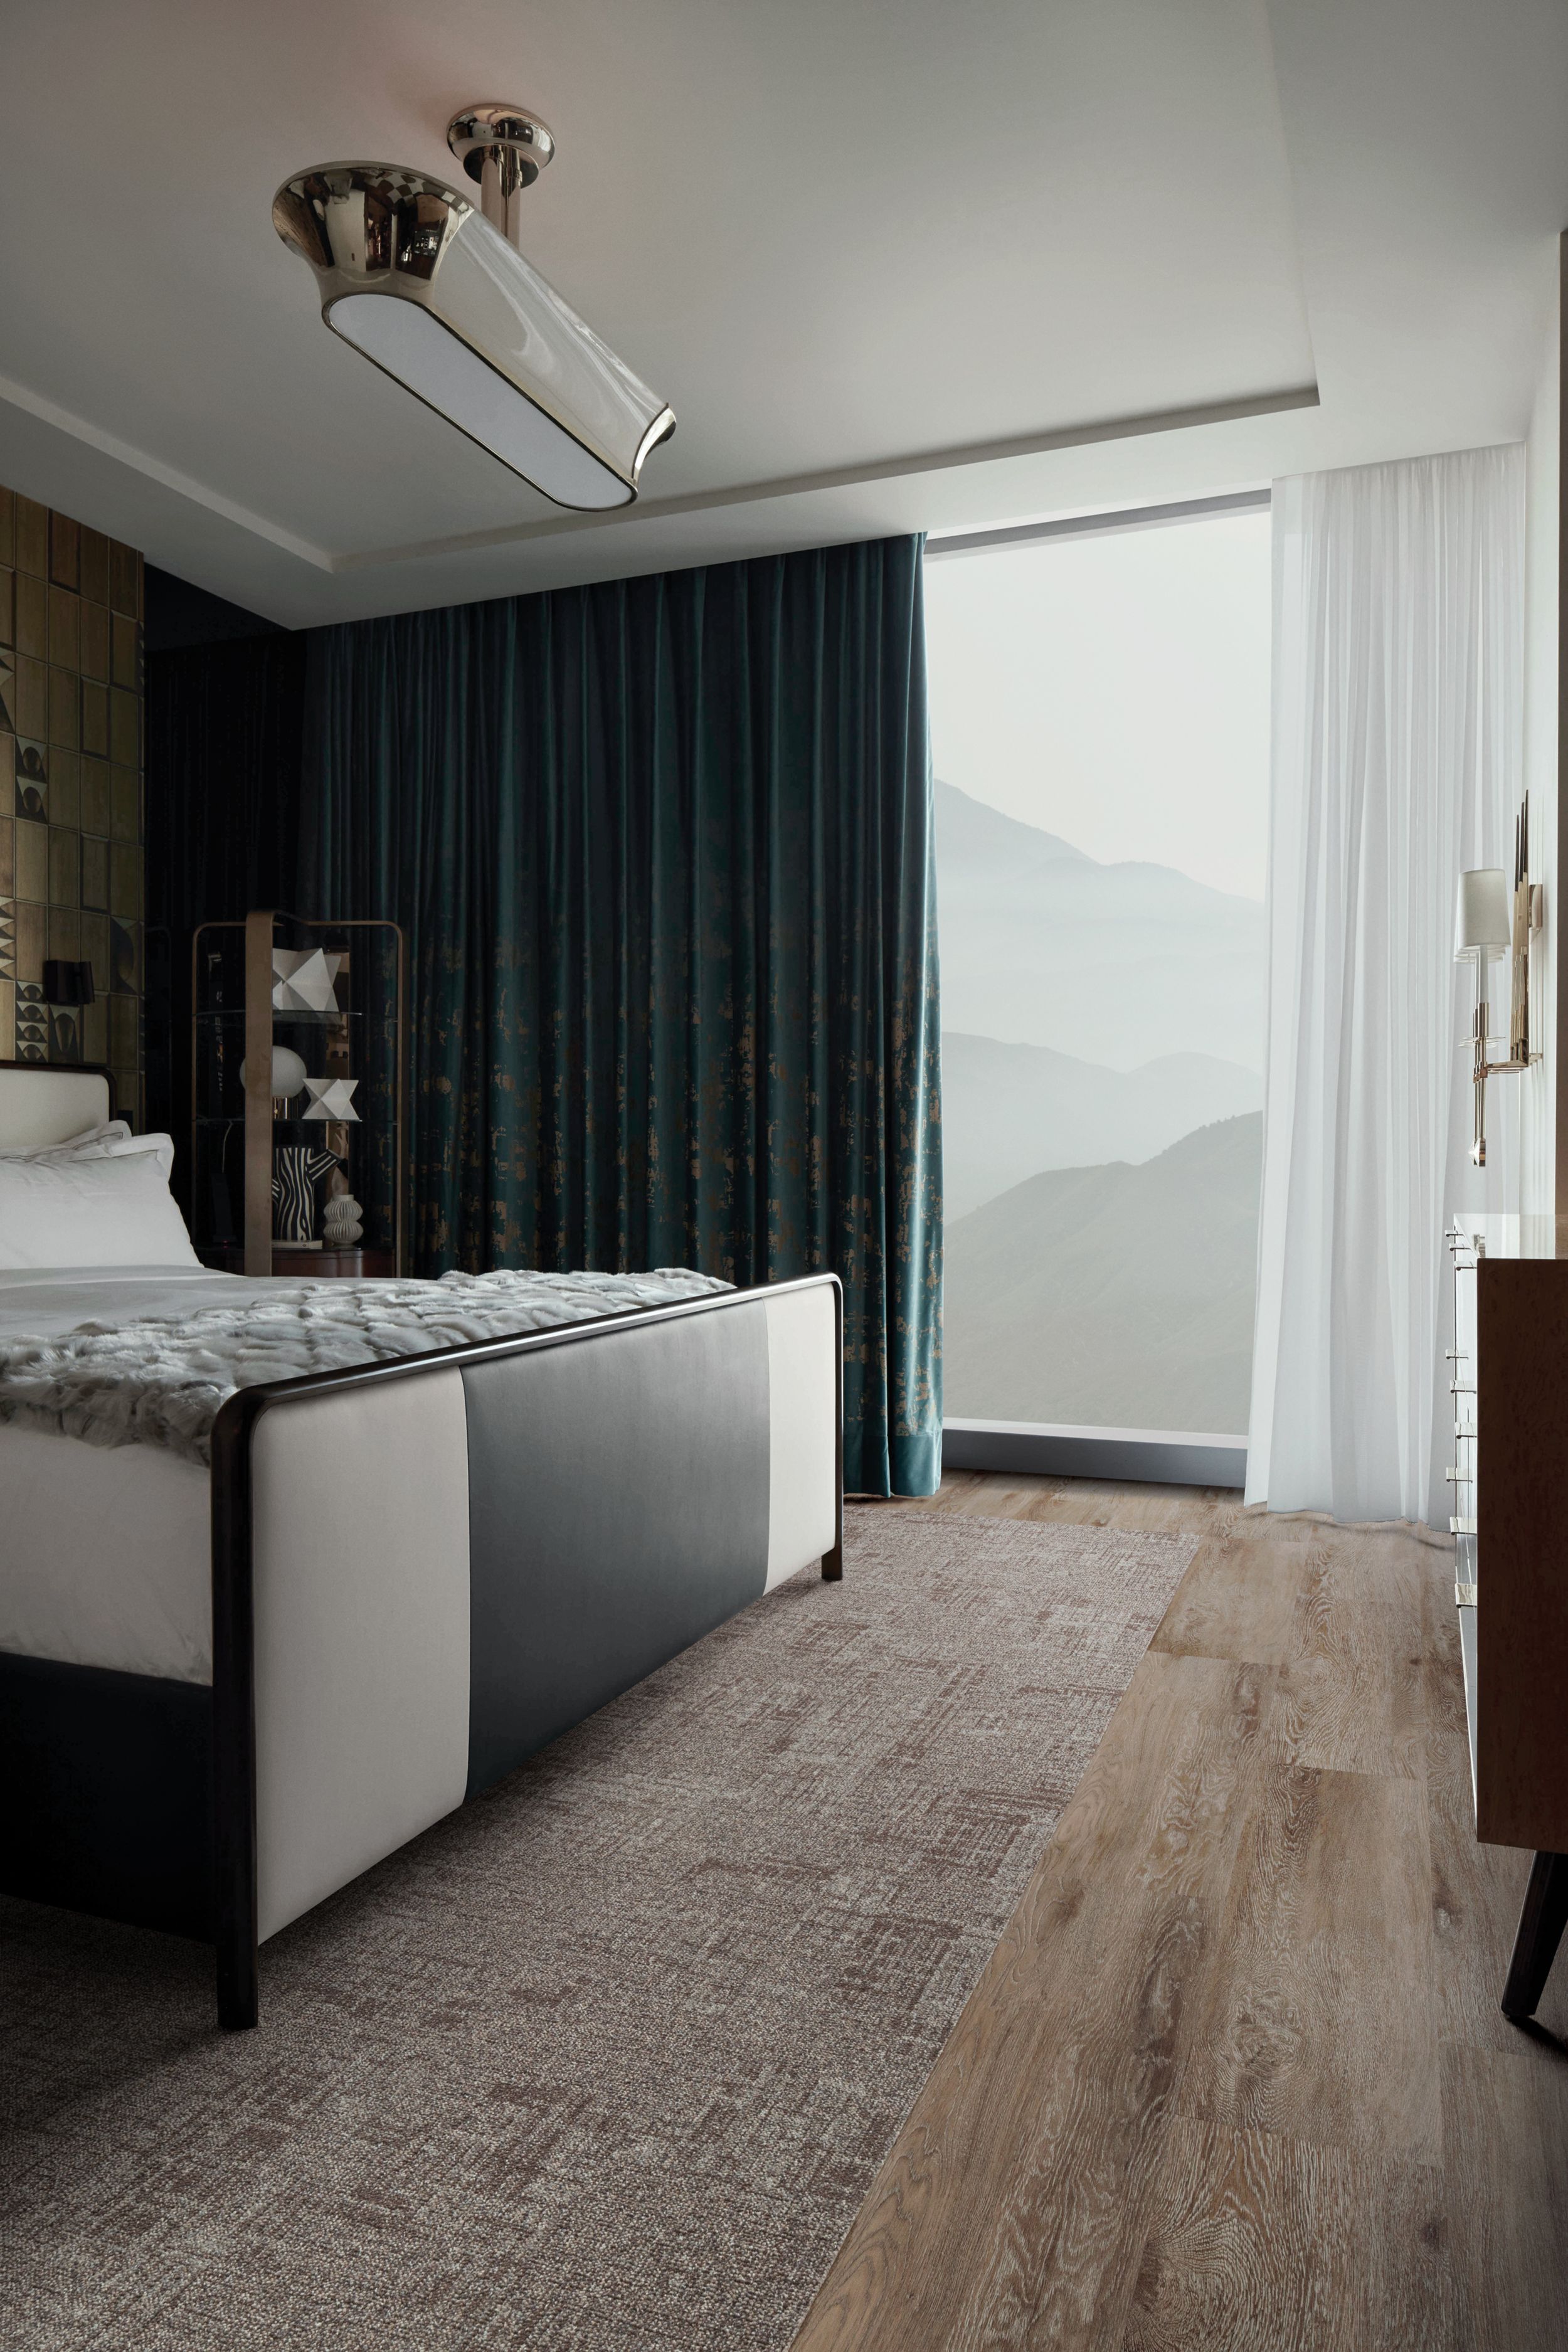 Interface RMS 701 plank carpet tile with Textured Woodgrains LVT in hotel guest room imagen número 9